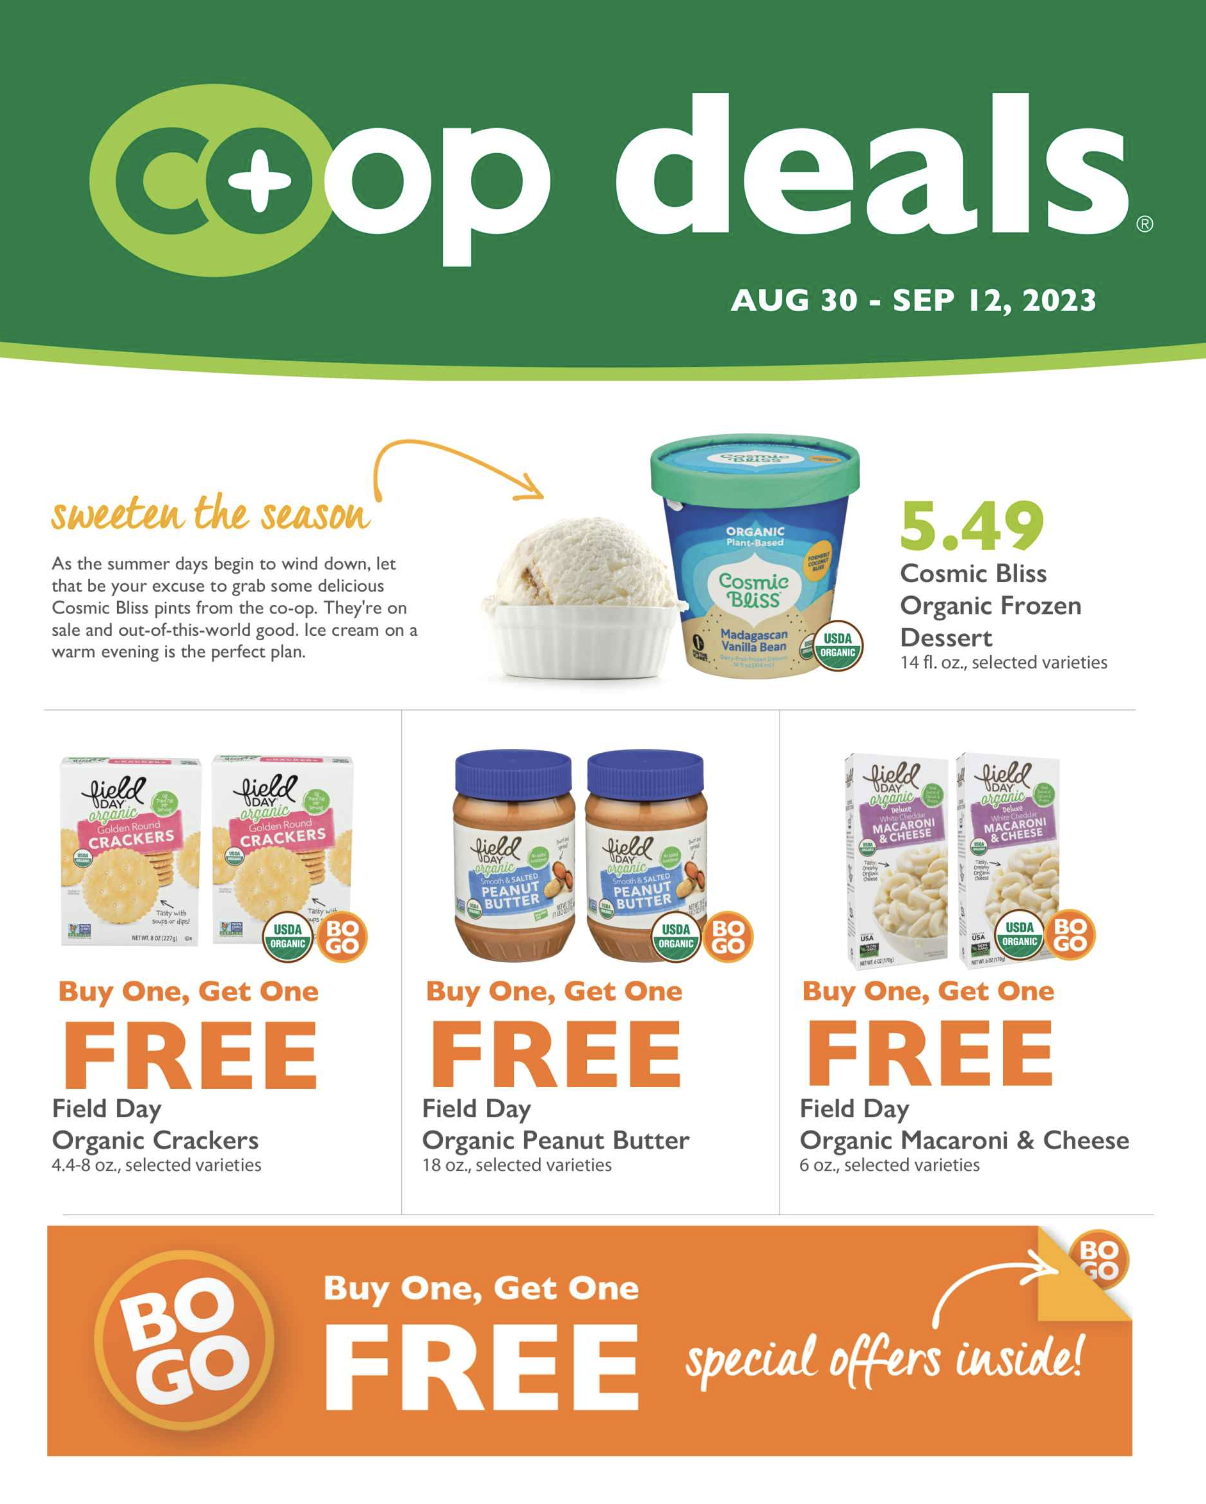 Image Preview of Co Op Deals from August 30 through September 12